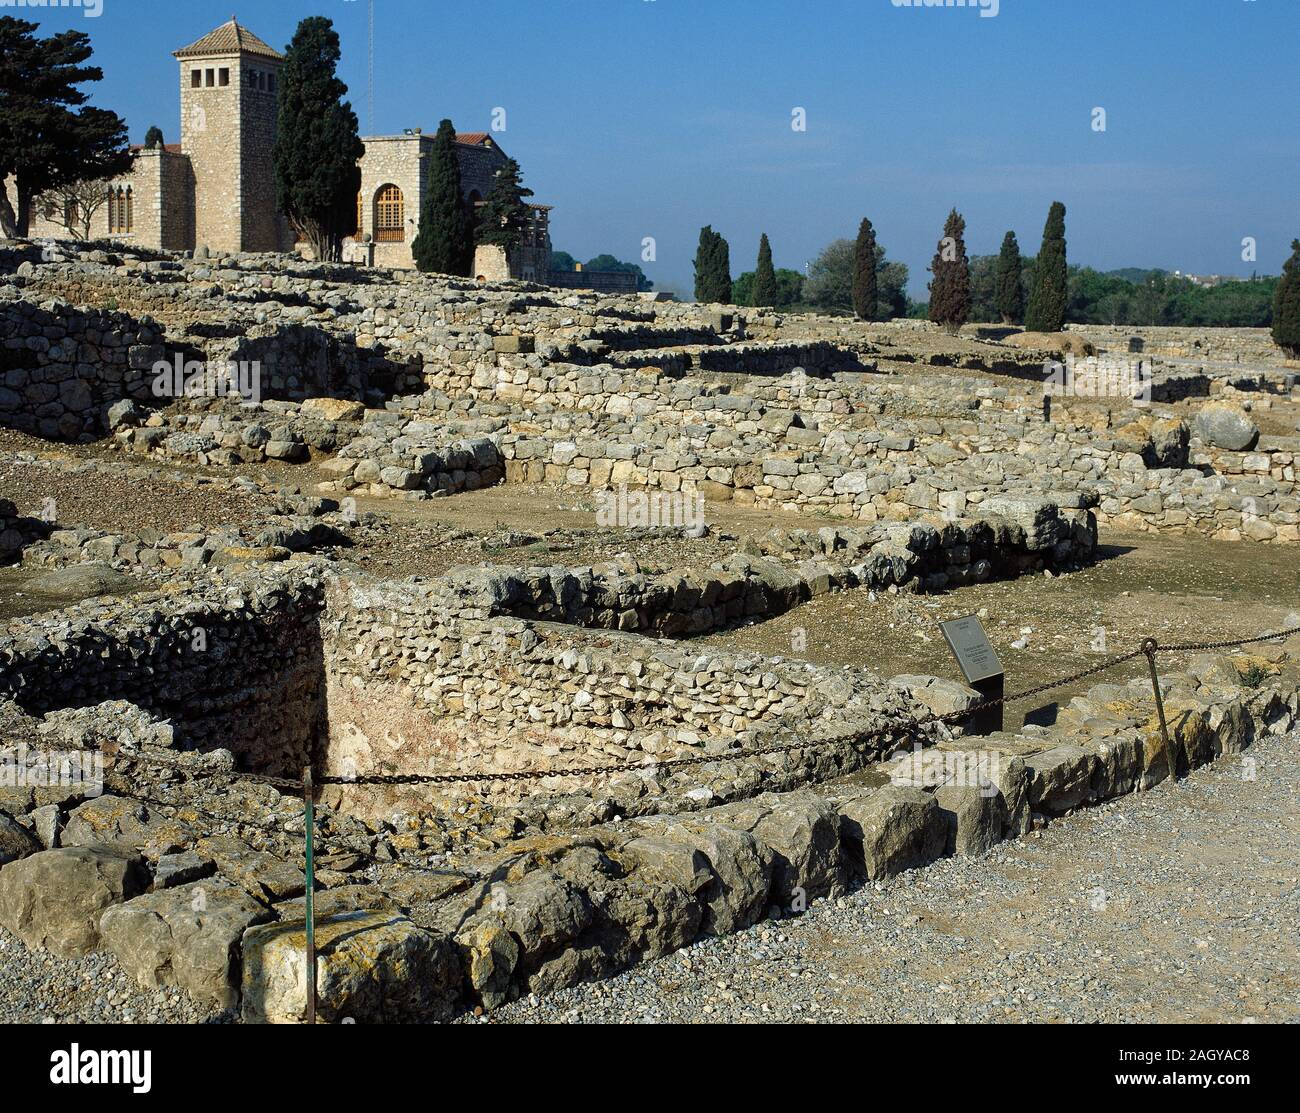 Spain, Catalonia, Girona province, Empuries. Ancient city on the Mediterranean coast. Greek Neapolis. Ruins of an old fish salting factory. Stock Photo